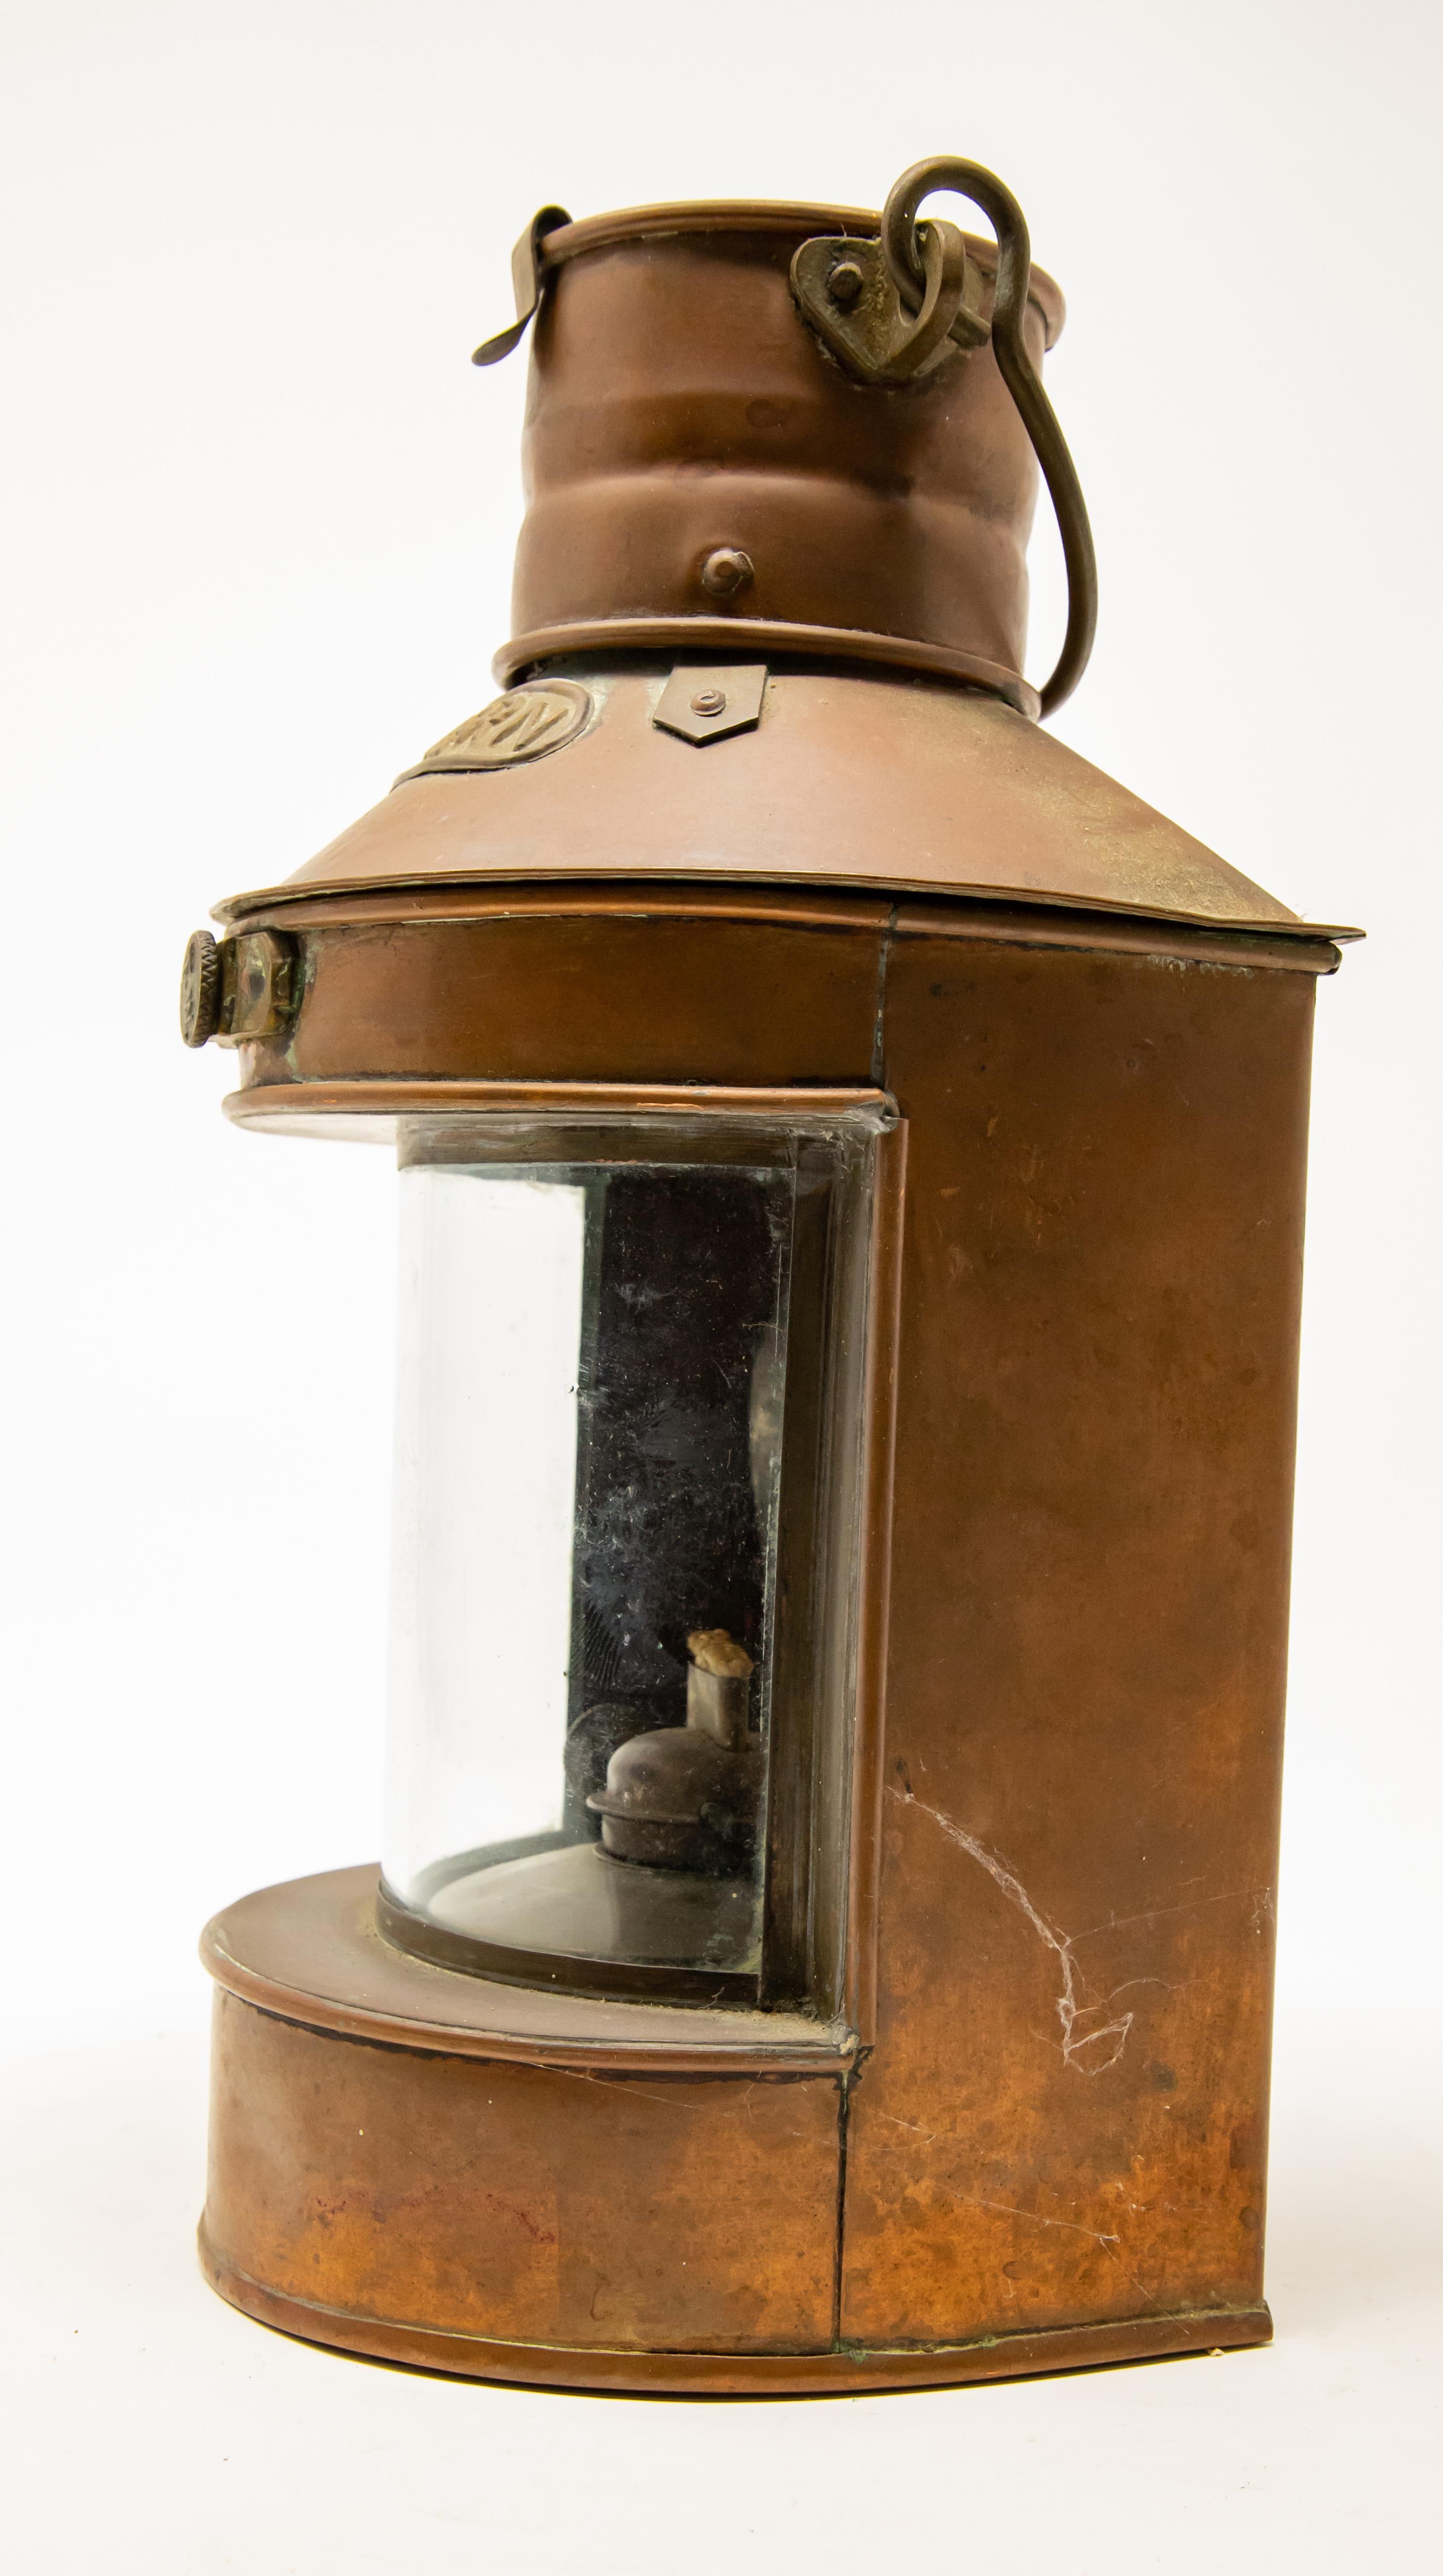 Offering this copper stern ship lantern. Made by Tung Woo out of Hong Kong. Has the stern label on the top, and a clear glass front.